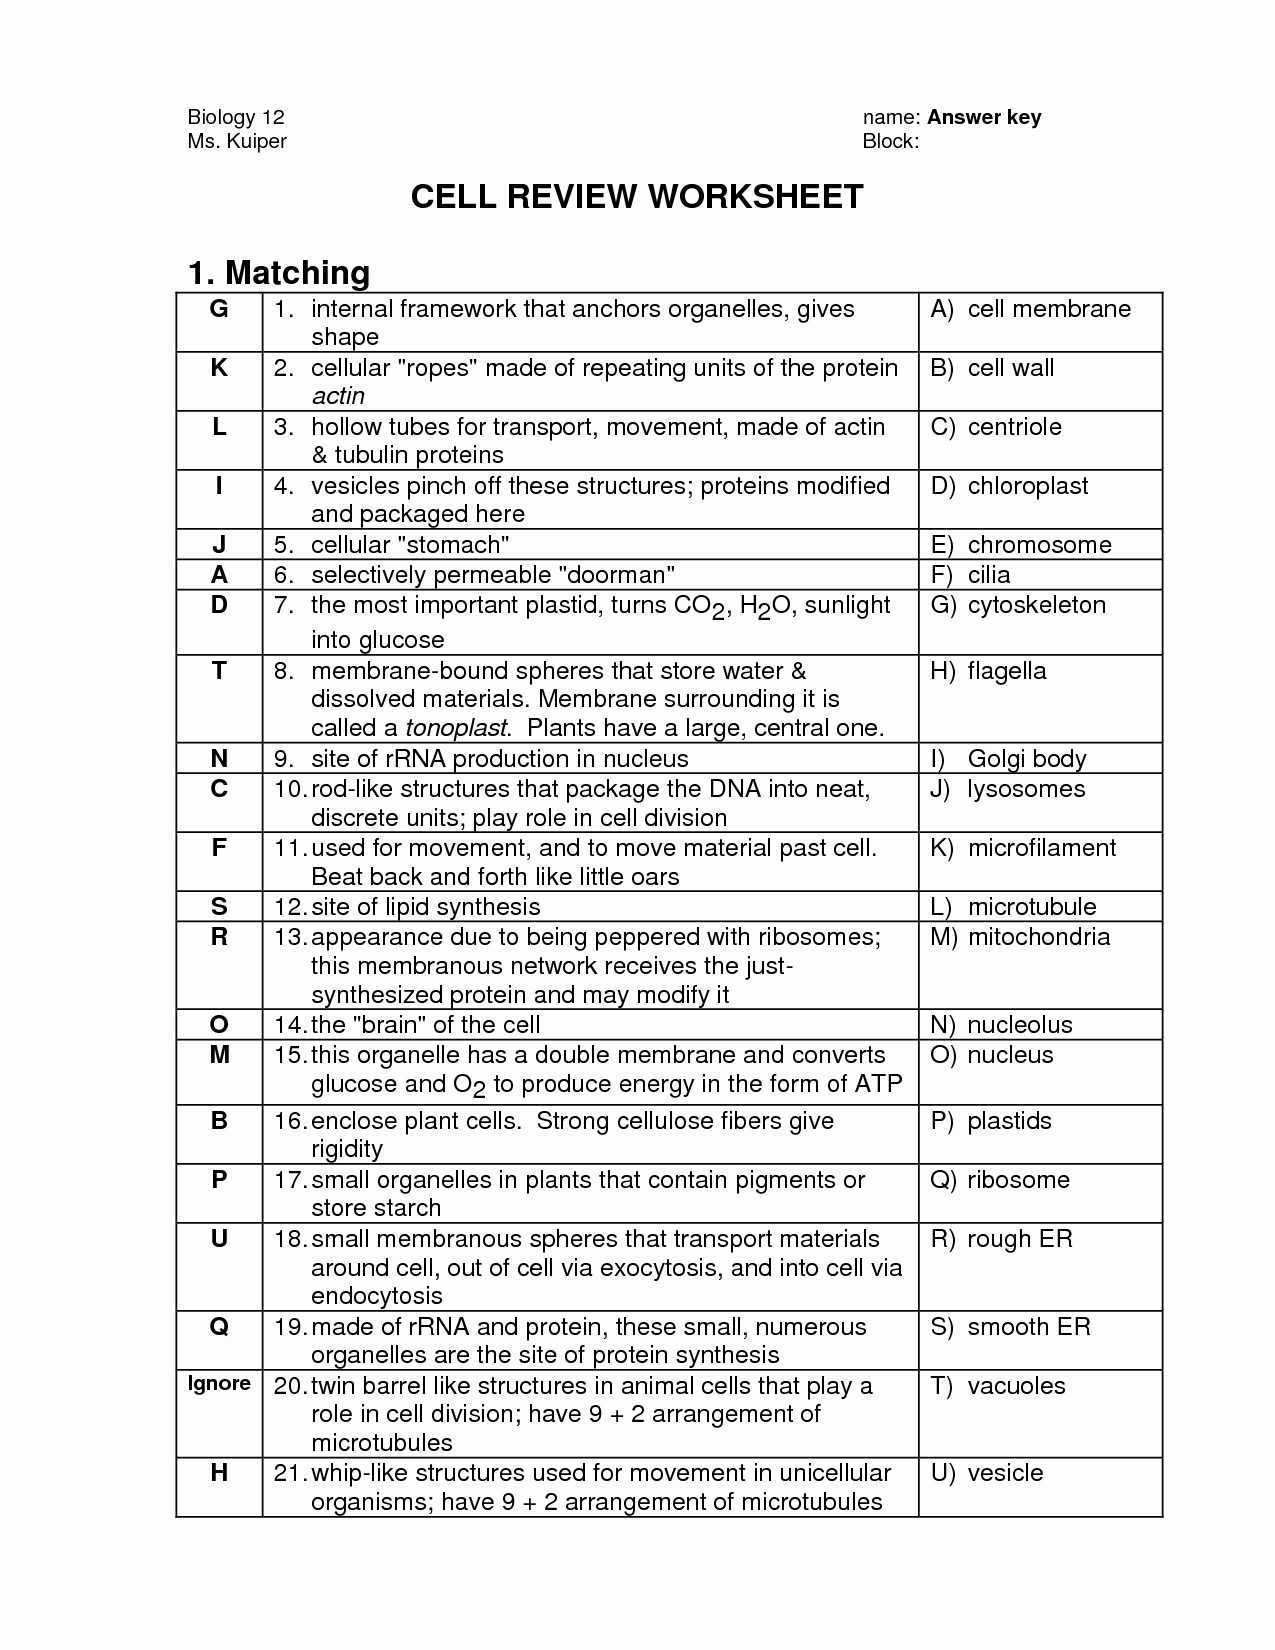 Functions Worksheet with Answers Along with Cell organelle Crossword Puzzle Worksheet Answers Crossword Puzzle